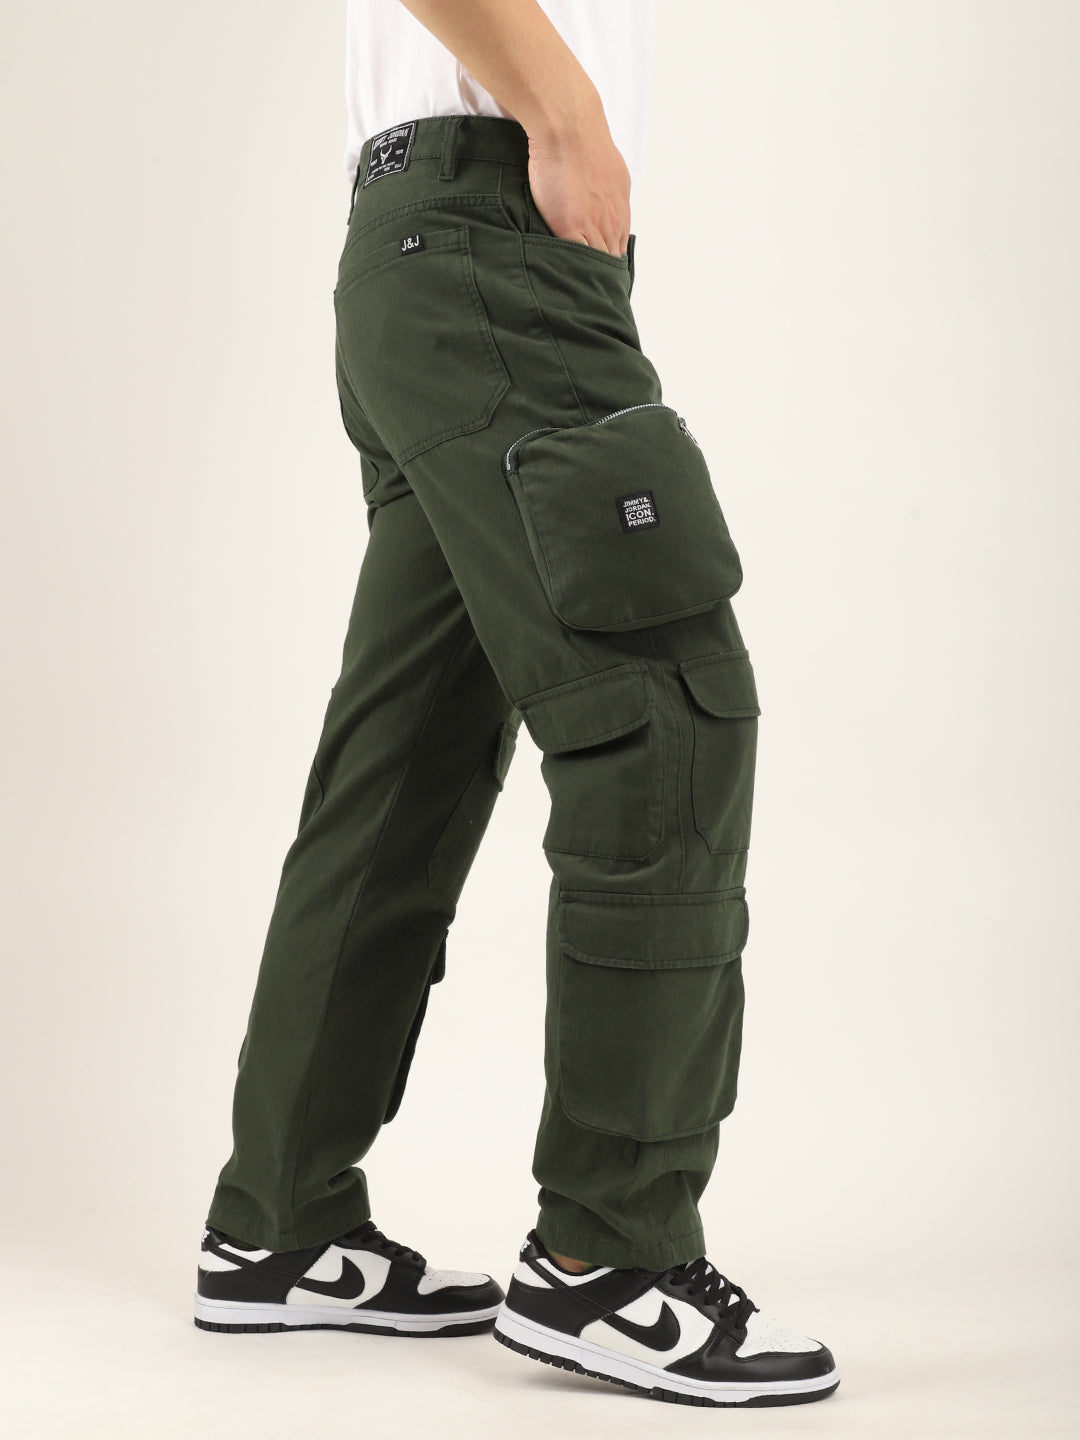 Boombox Green Baggy Fit Cotton Cargo